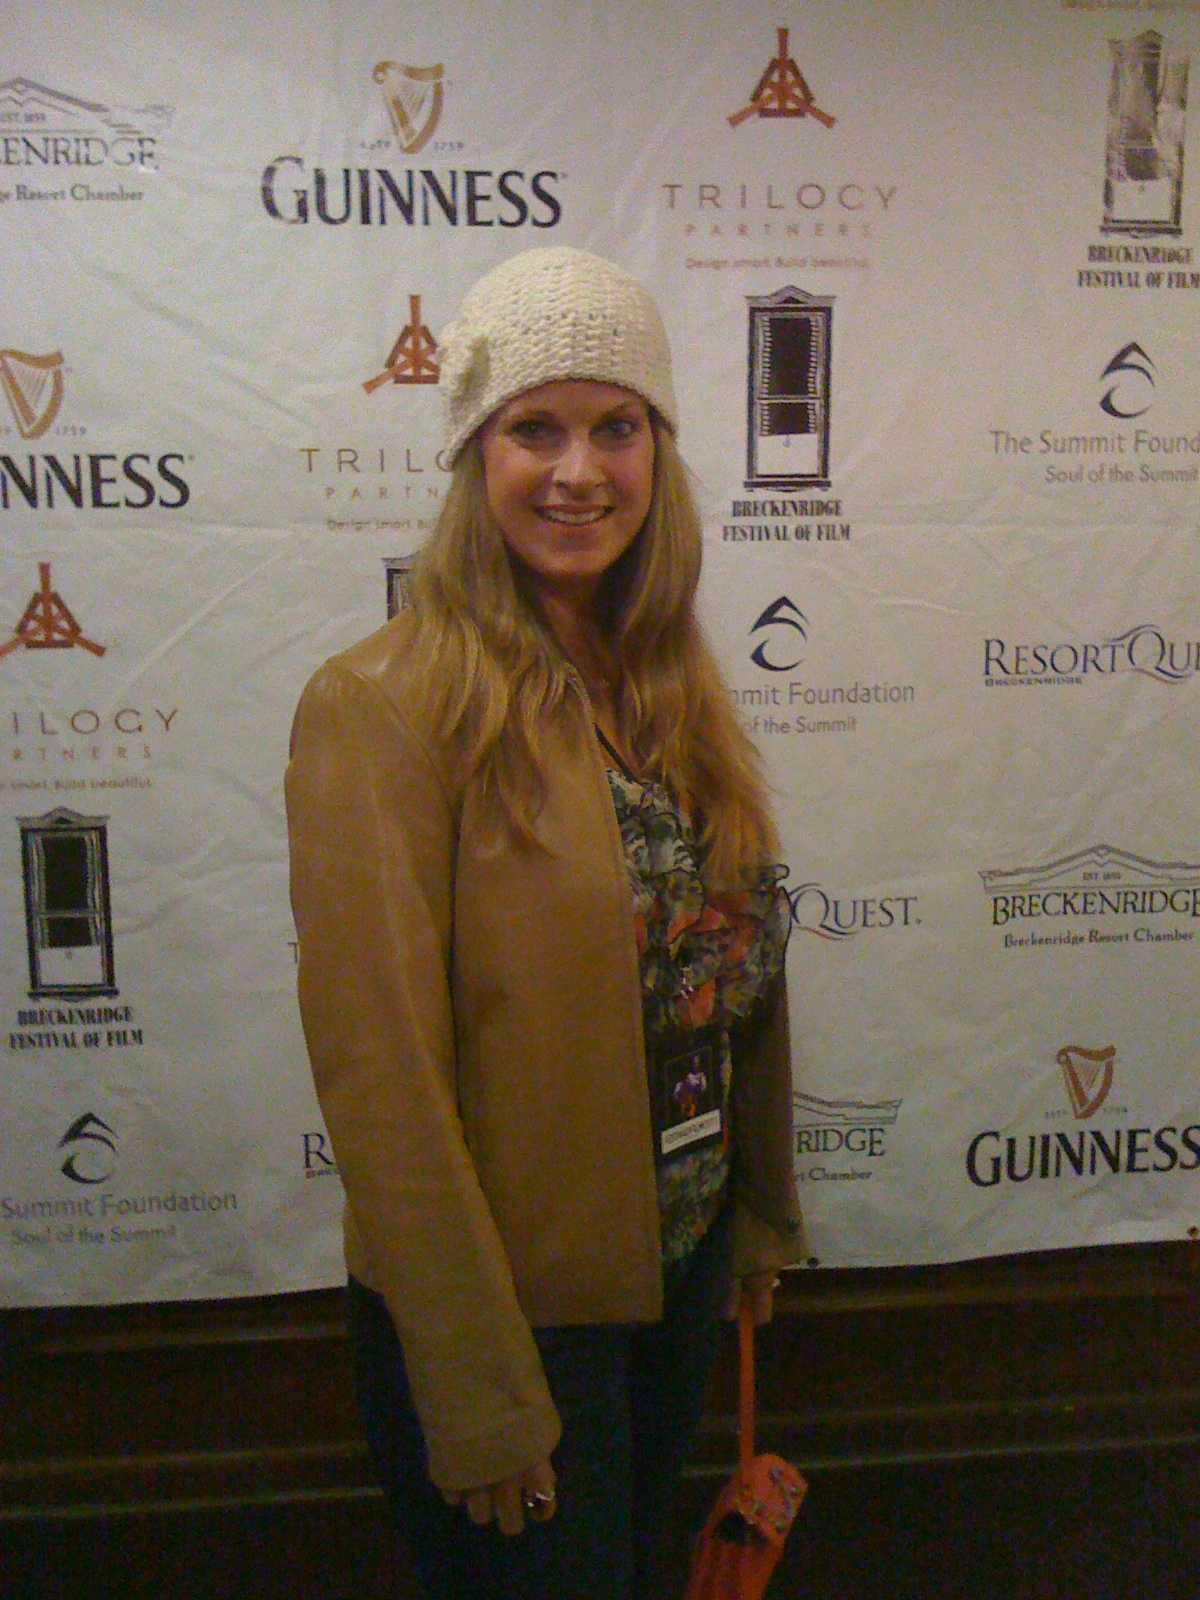 On the Red Carpet at the Breckenridge Festival of Film for the world premiere of Driving By Braille in June 2011.